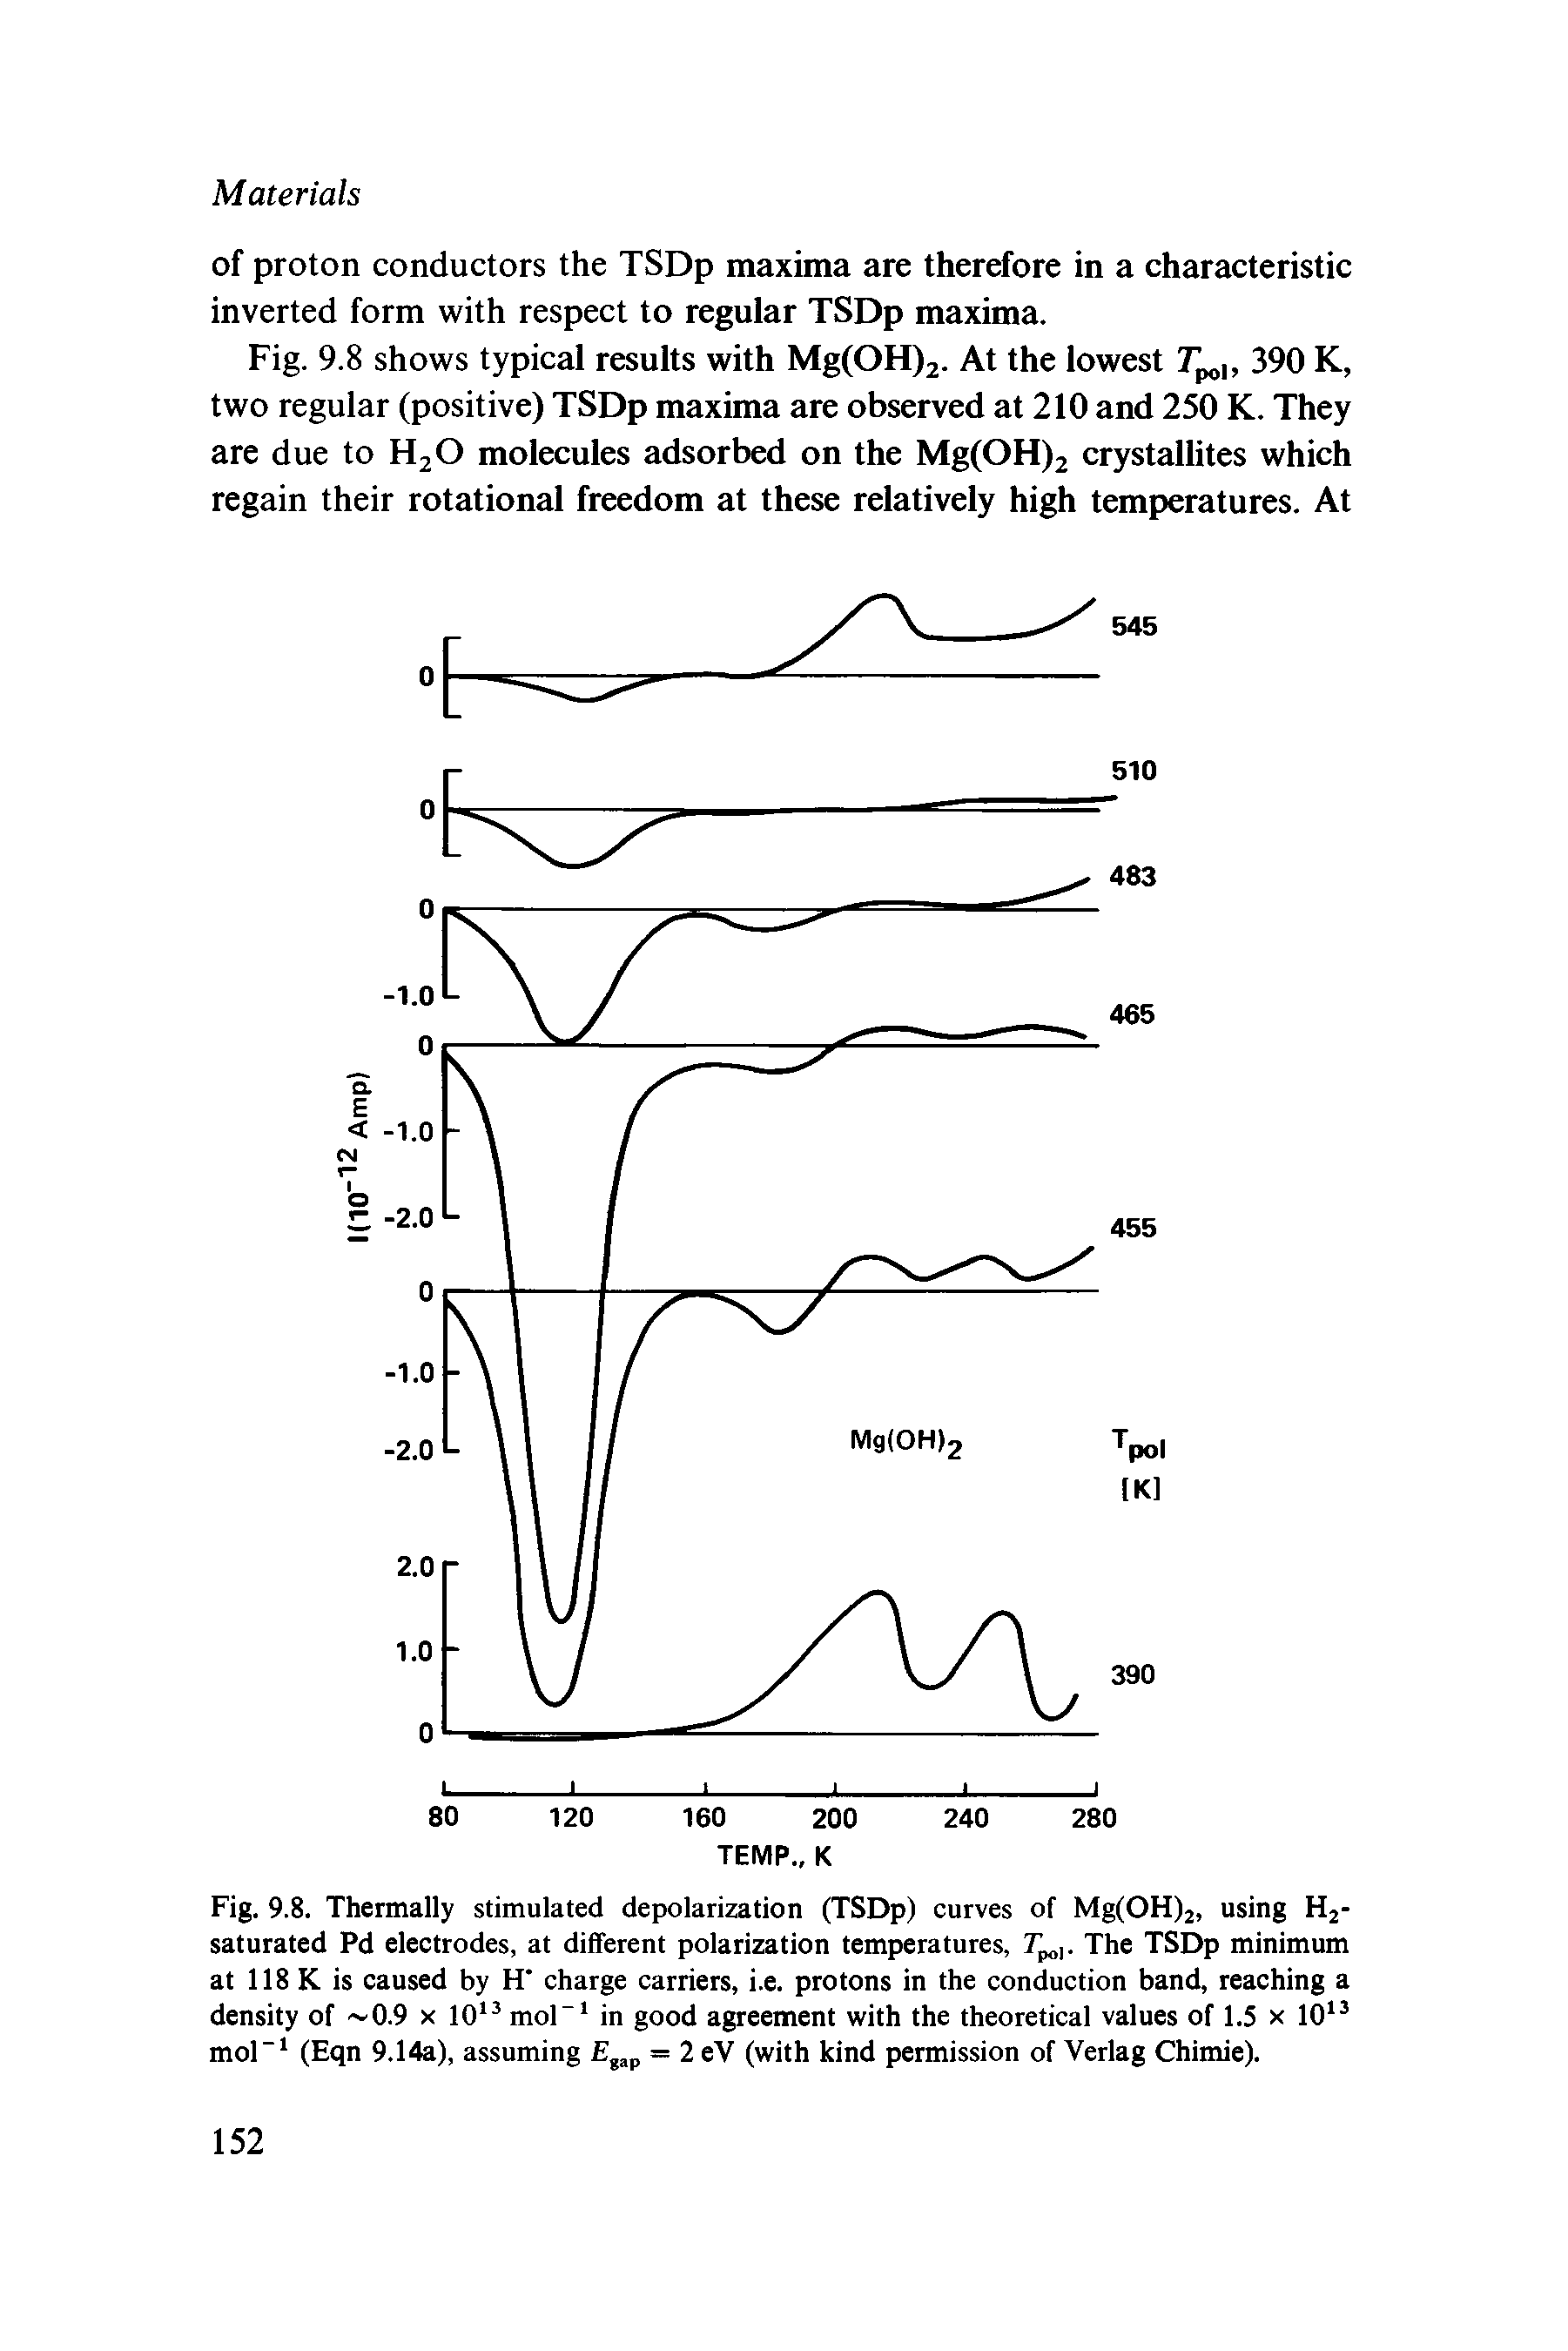 Fig. 9.8. Thermally stimulated depolarization (TSDp) curves of Mg(OH)2, using H2-saturated Pd electrodes, at different polarization temperatures, Tp ,. The TSDp minimum at 118 K is caused by H charge carriers, i.e. protons in the conduction band, reaching a density of 0.9 x 10 mol in good agreement with the theoretical values of 1.5 x 10 mol" (Eqn 9.14a), assuming E = 2 eV (with kind permission of Verlag Chimie).